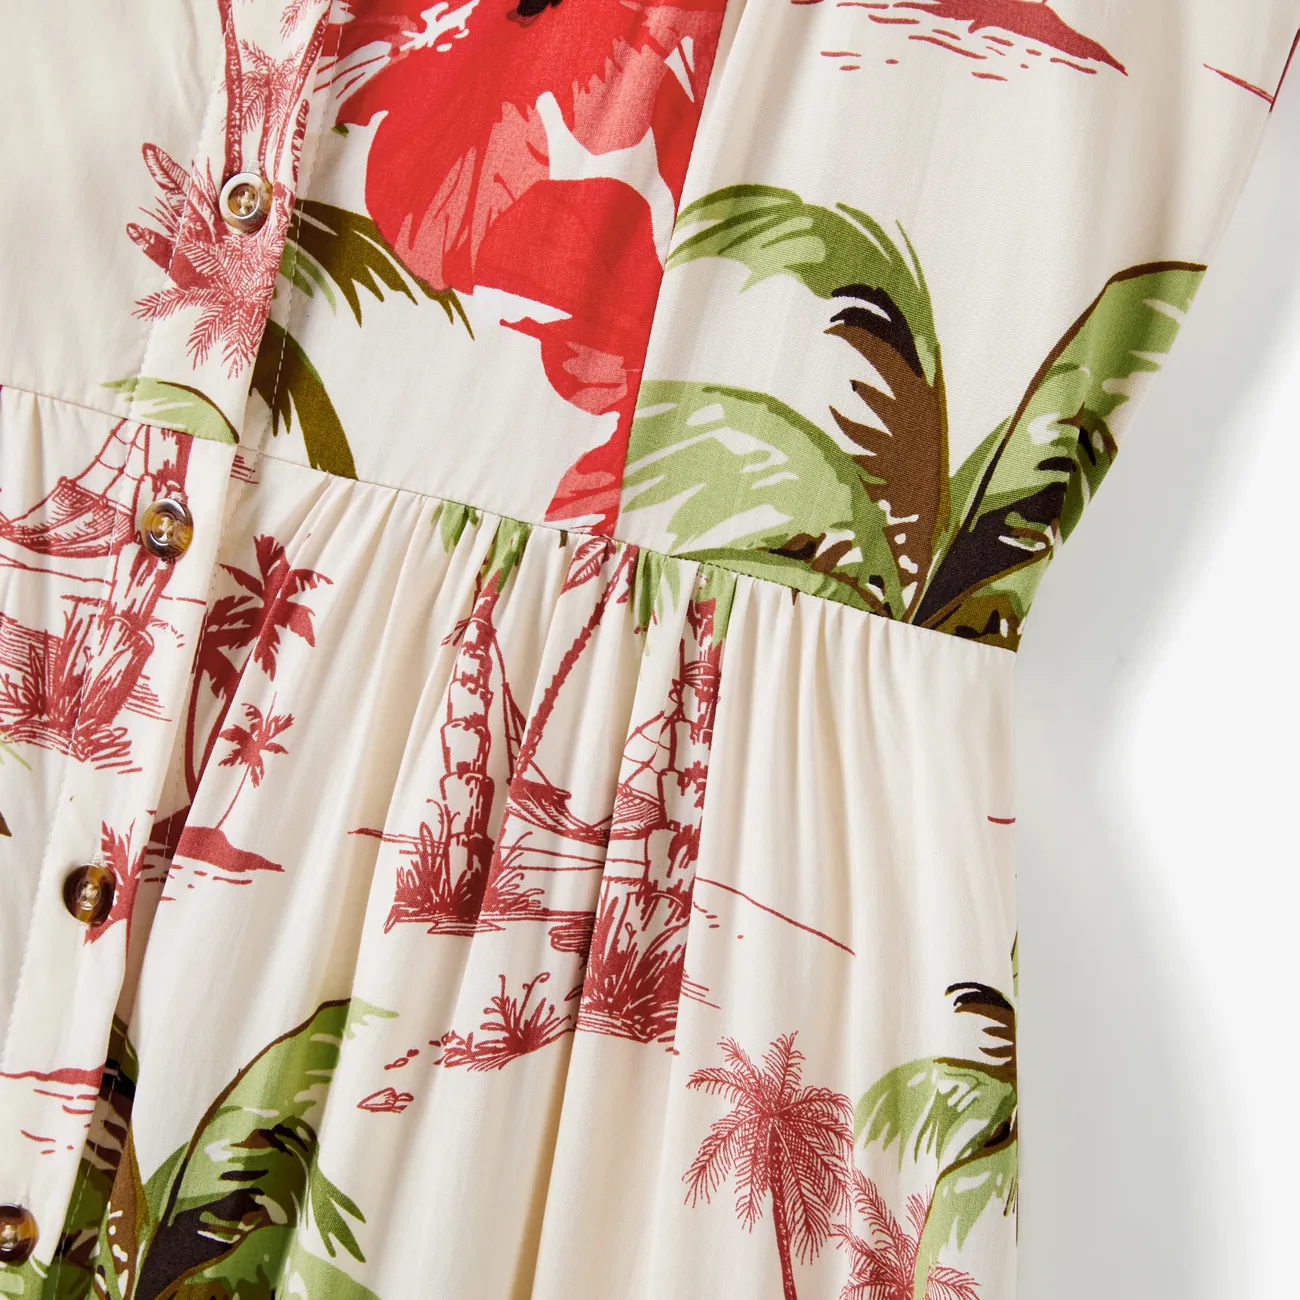 Family Matching Tropical Floral Beach Shirt and Button Strap Midi Dress Sets MultiColour big image 1